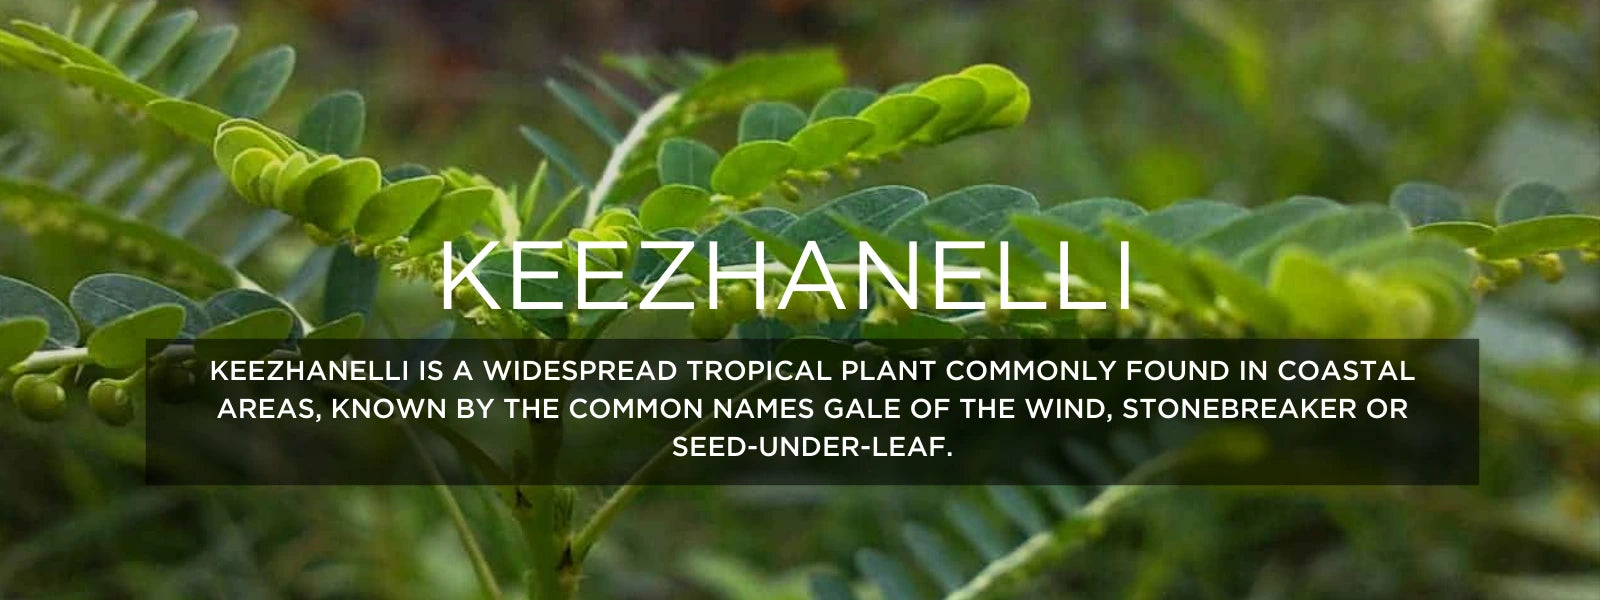 Keezhanelli - Health Benefits, Uses and Important Facts